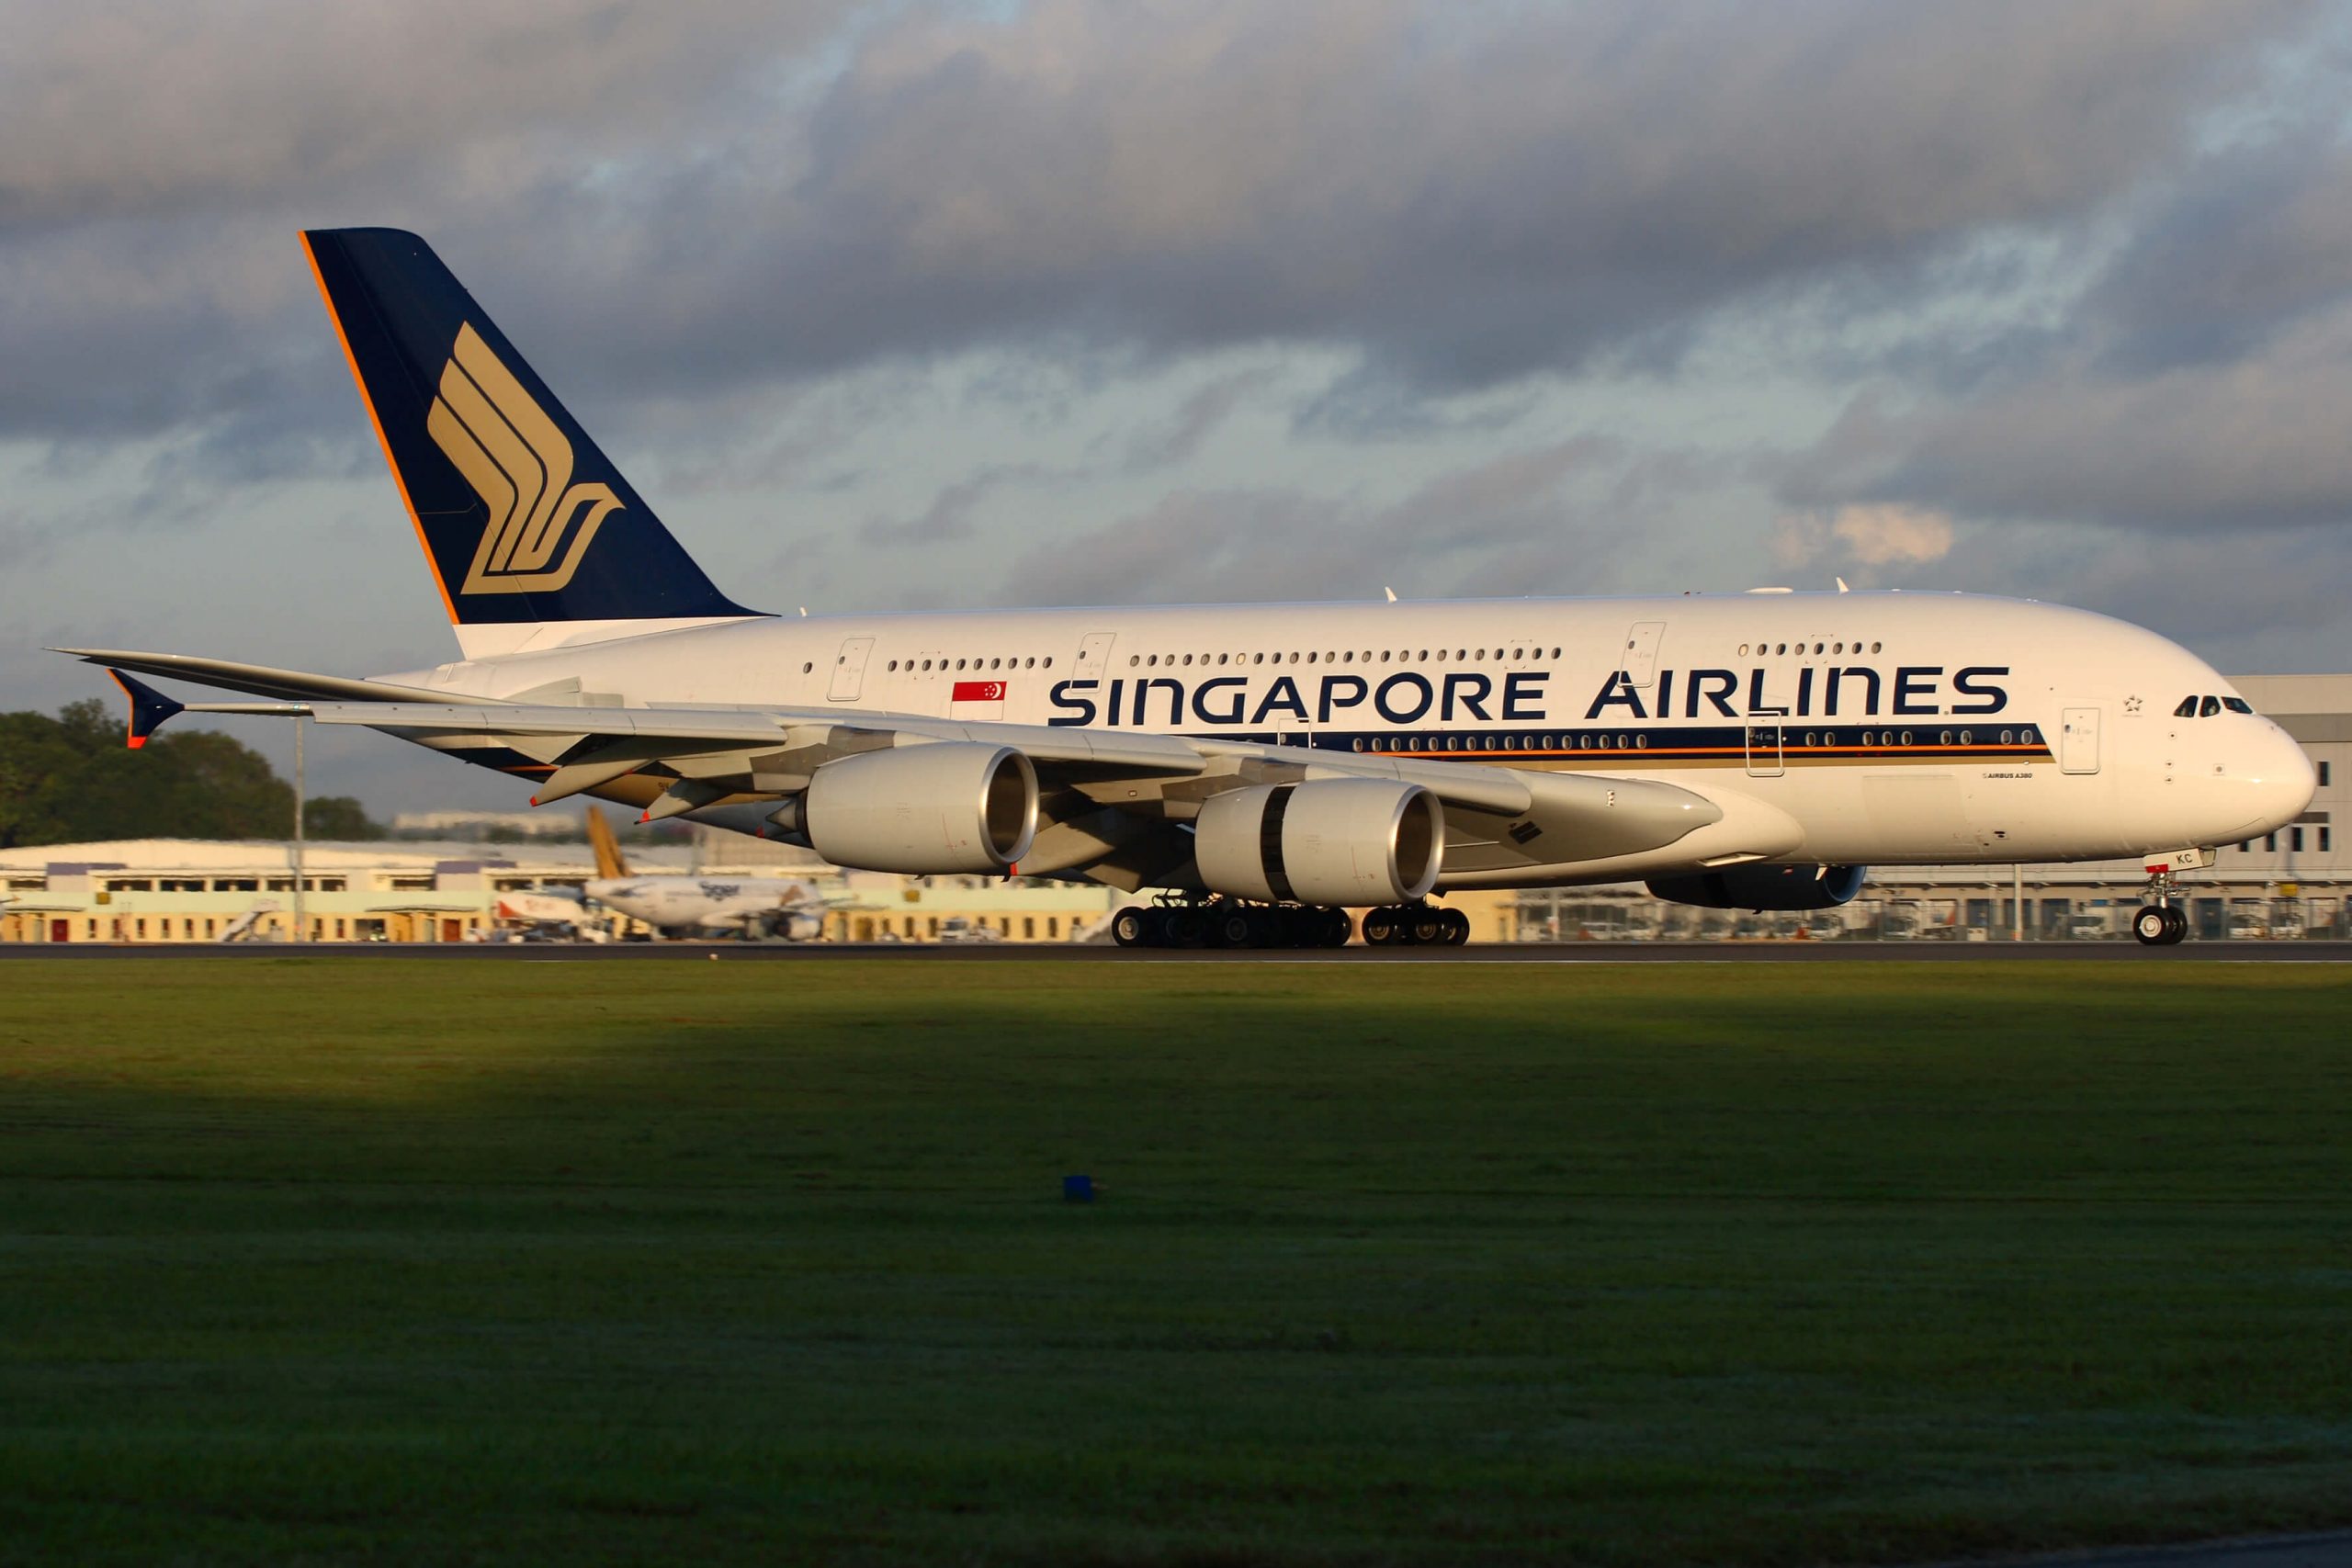 Singapore Airlines grounds 96% of flee